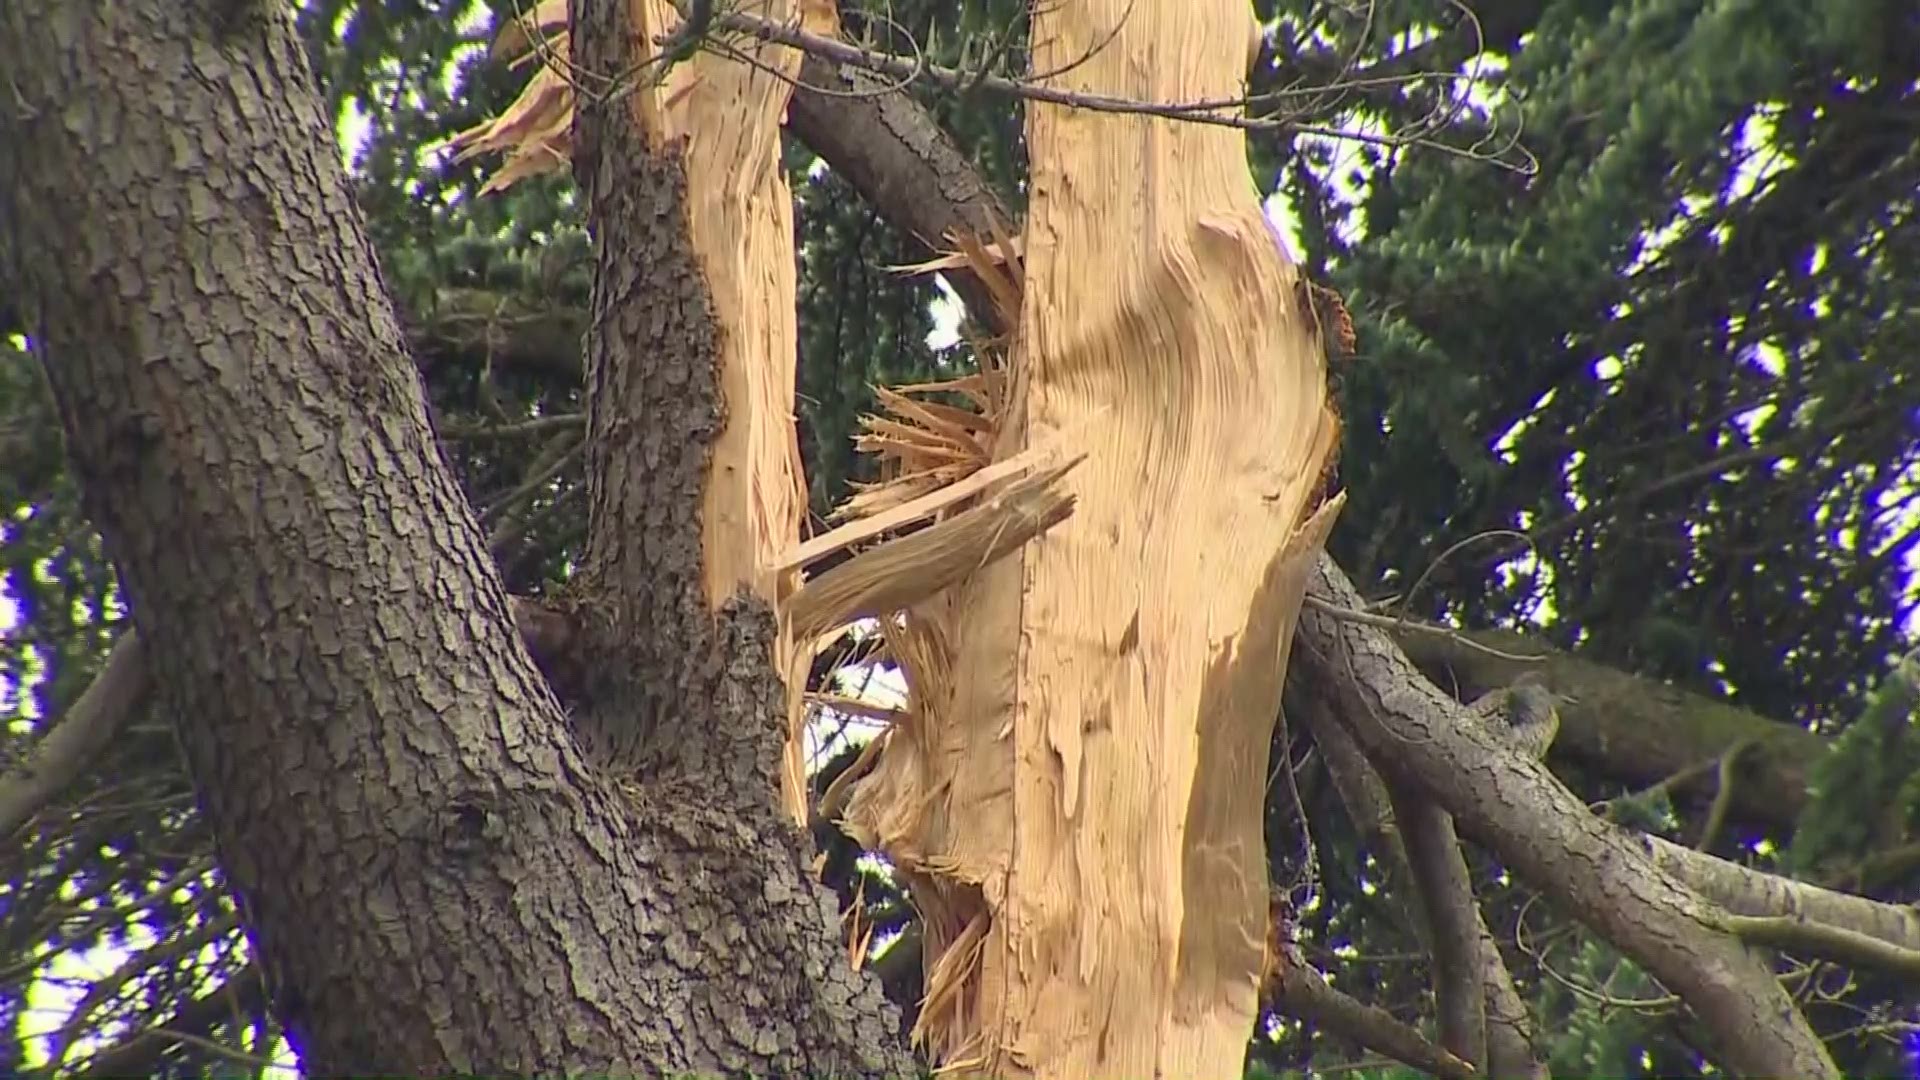 More than 2,200 strikes of lightning were counted across Puget Sound on Saturday night. Lightning shattered this large tree at Seattle's Green Lake and knocked out power to thousands.